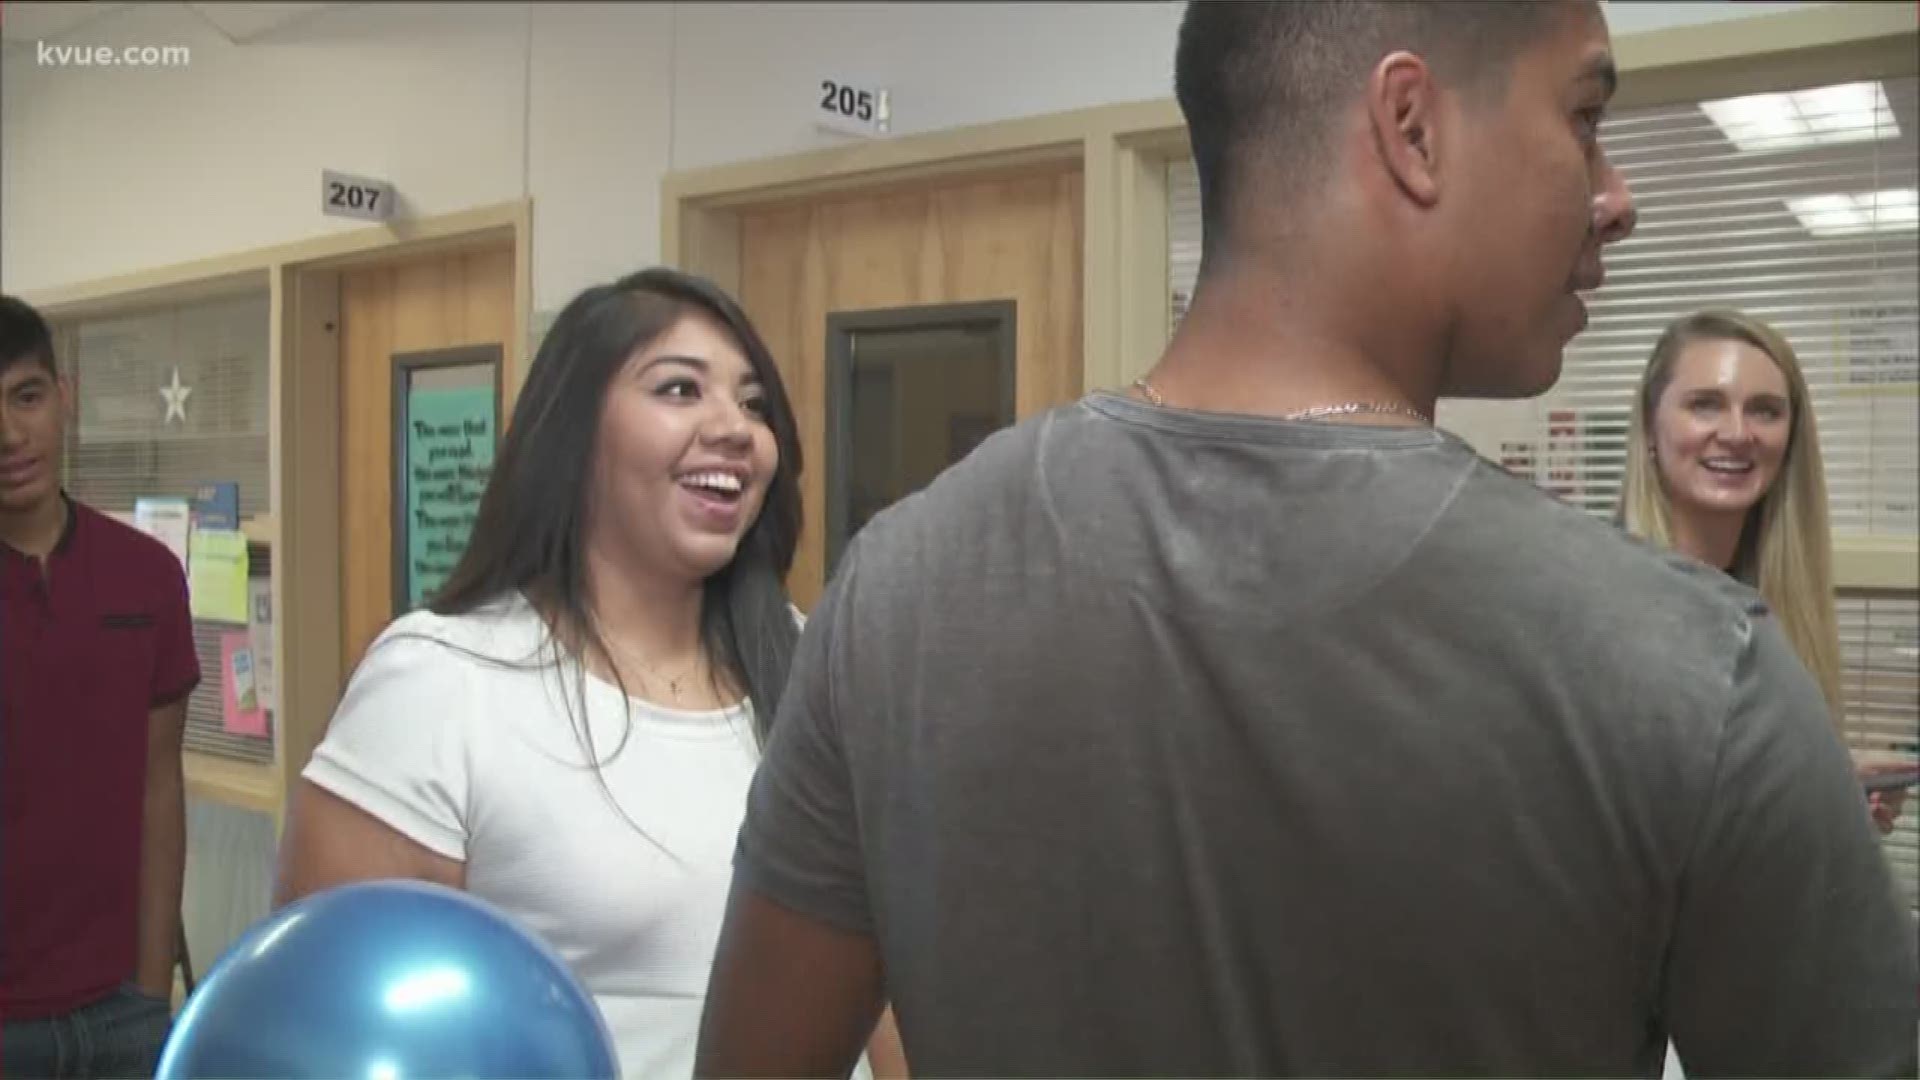 In partnership with Lorenz and Lorenz, KVUE is recognizing student-athletes who succeed both on the field or court and in the classroom with a $1,000 scholarship.